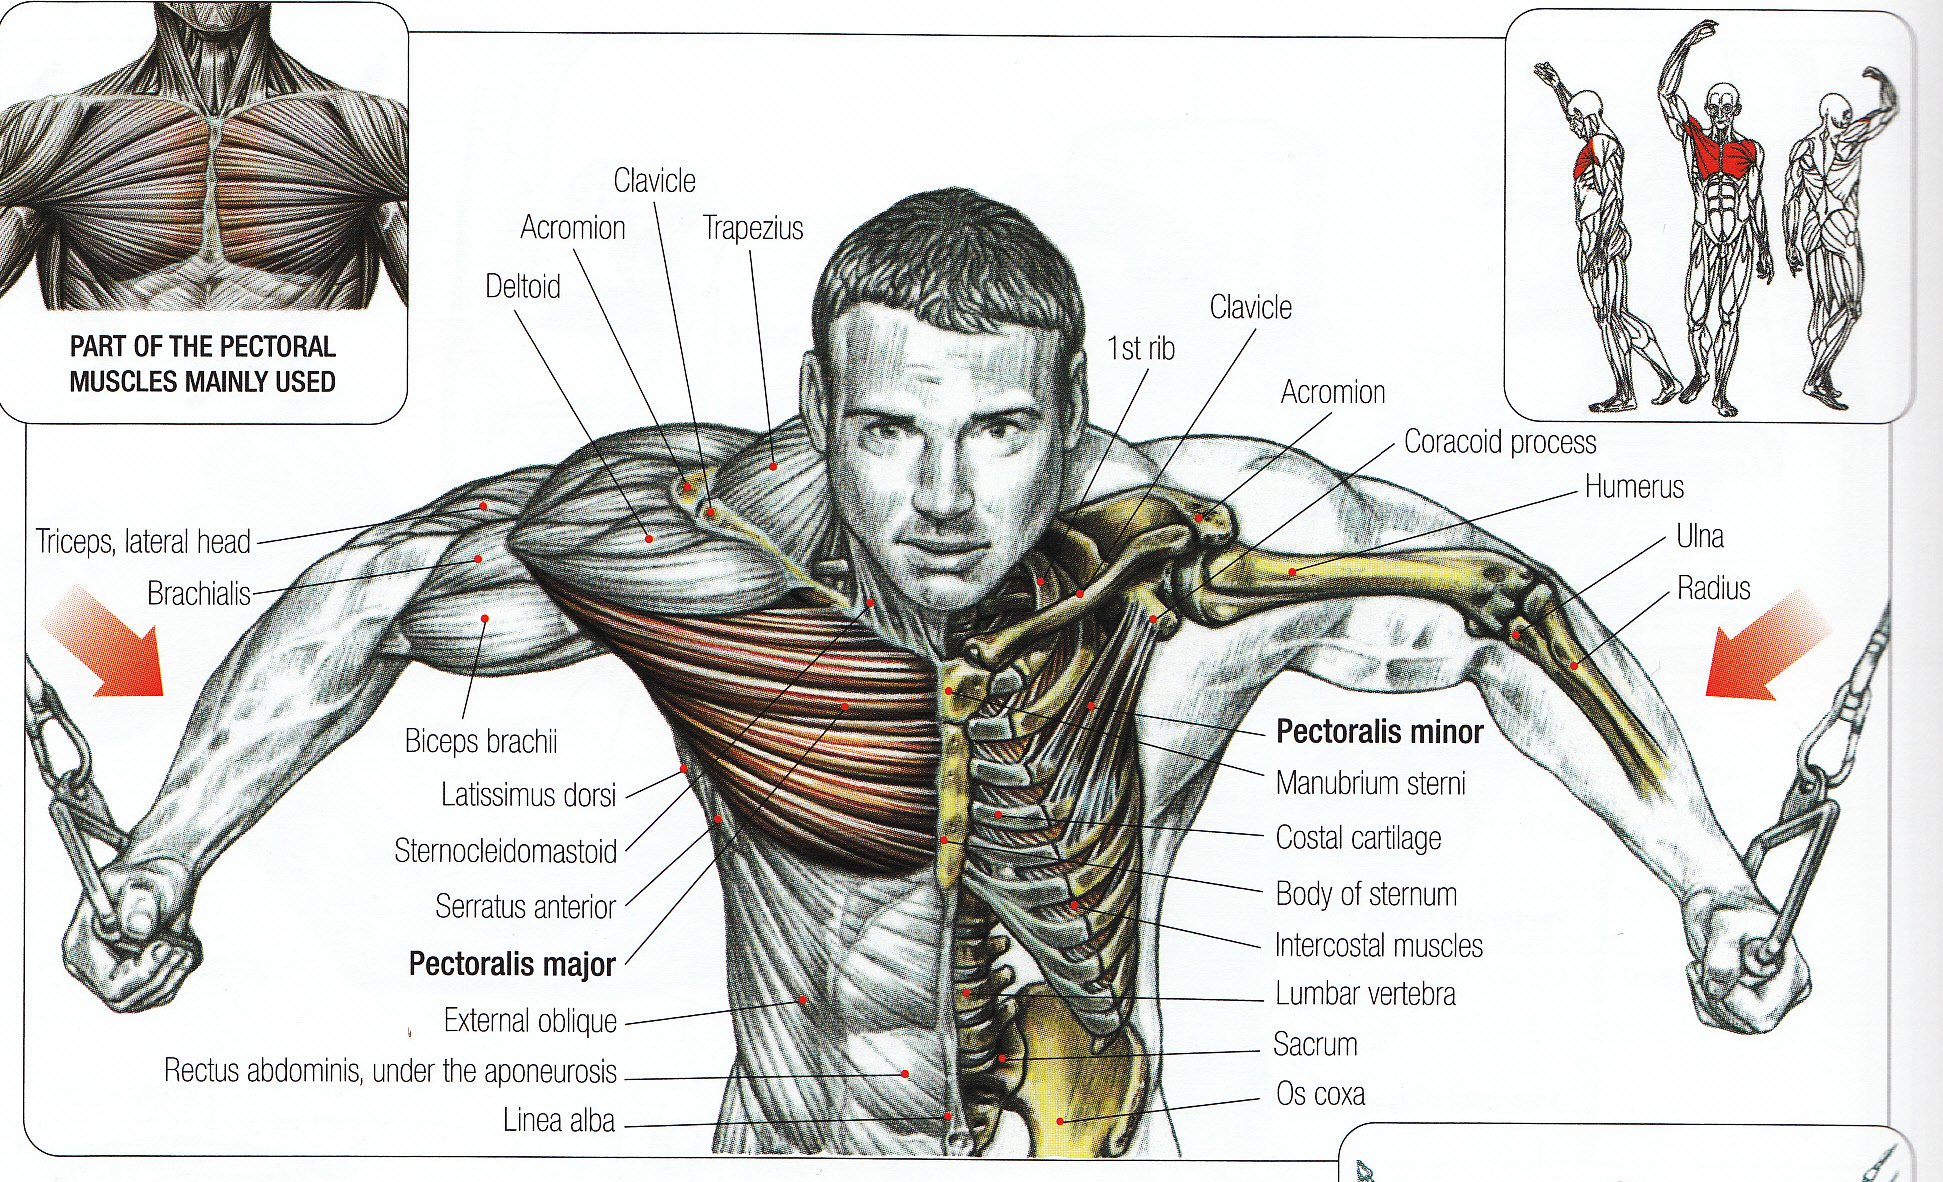 Cable Exercises - Cable Fly - Rope Curl - Cable Row